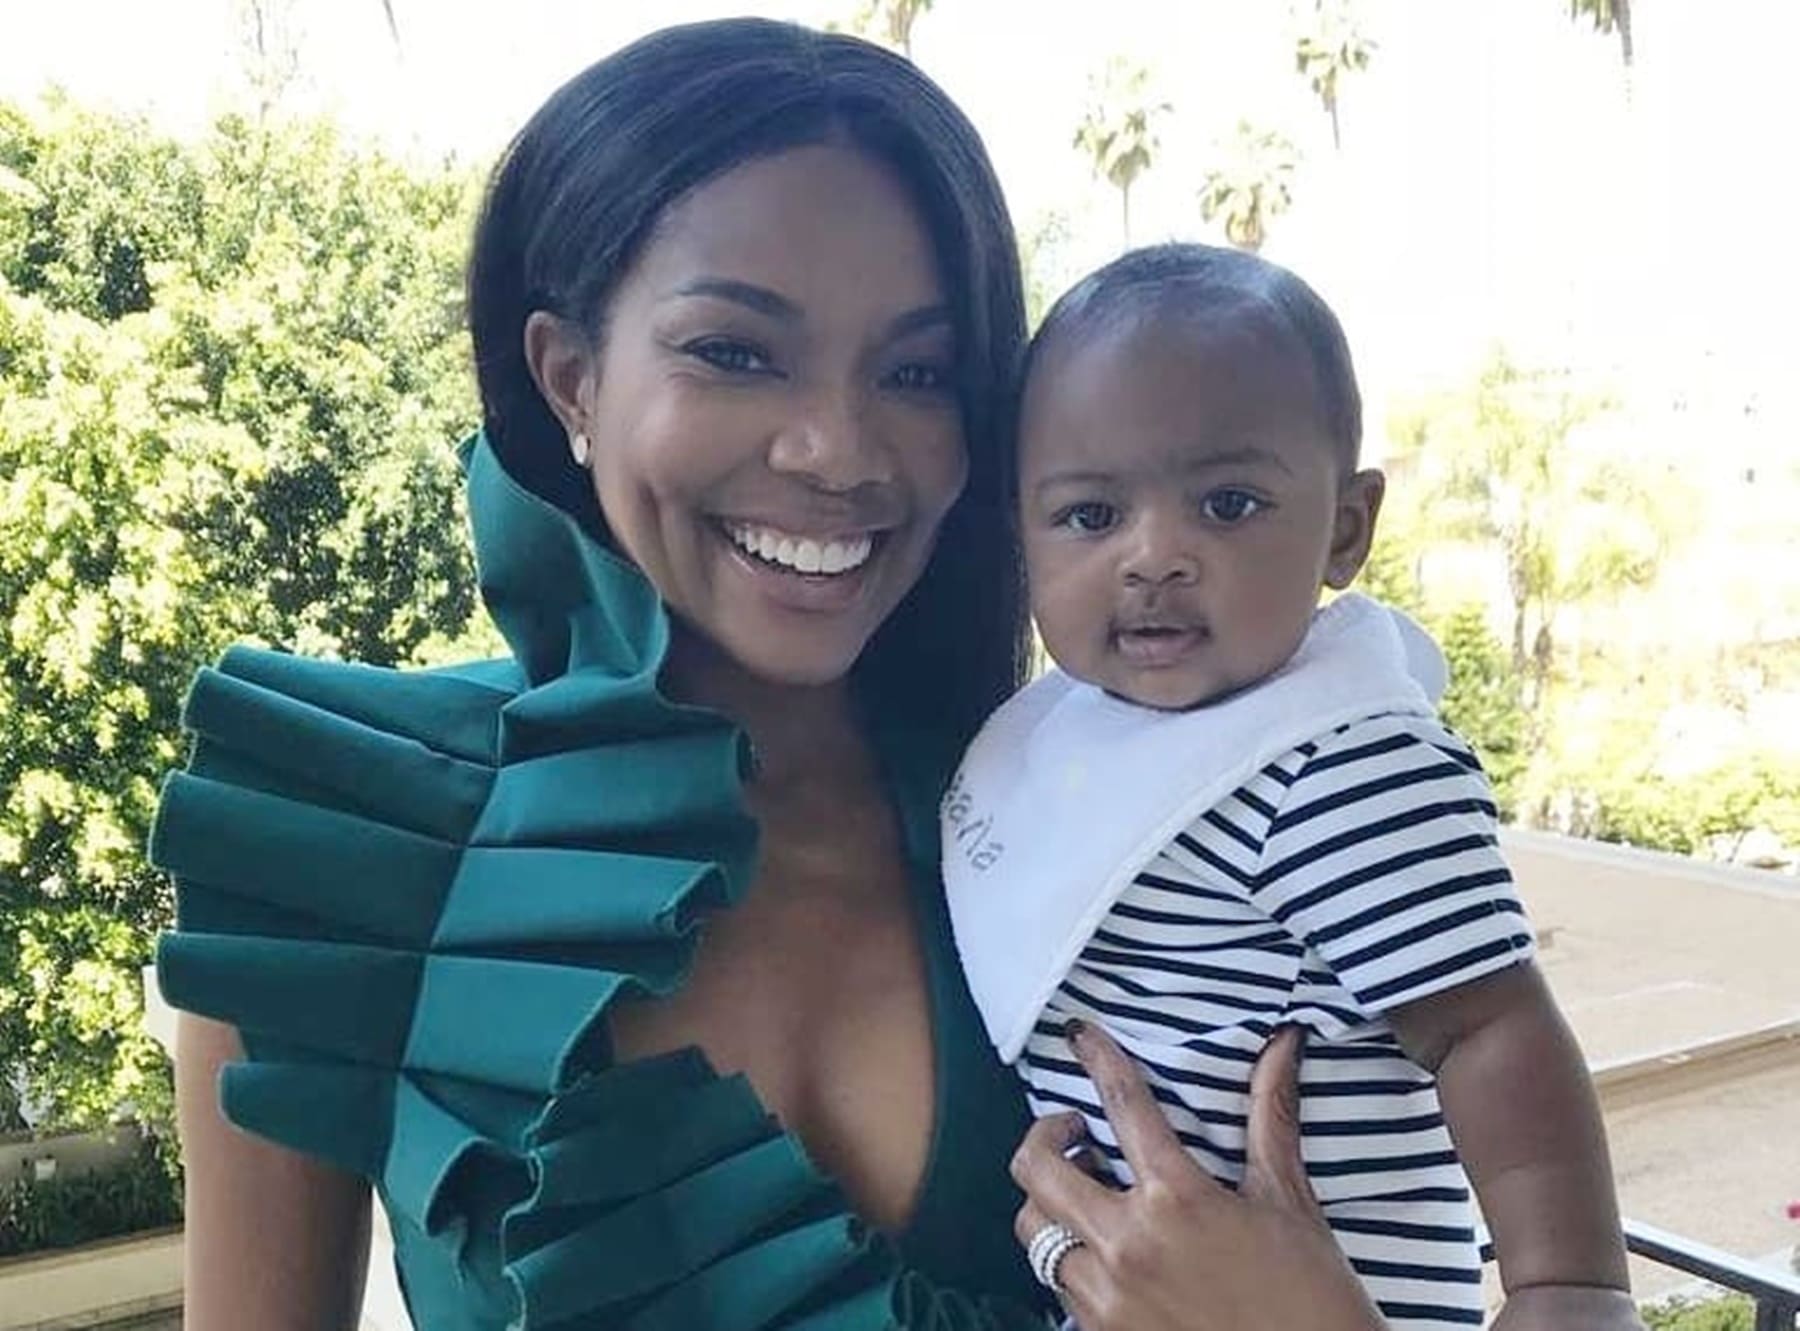 ”gabrielle-union-and-baby-kaavia-bring-joy-to-a-room-full-of-people-including-dwyane-wade-with-their-dance-moves-in-viral-video”